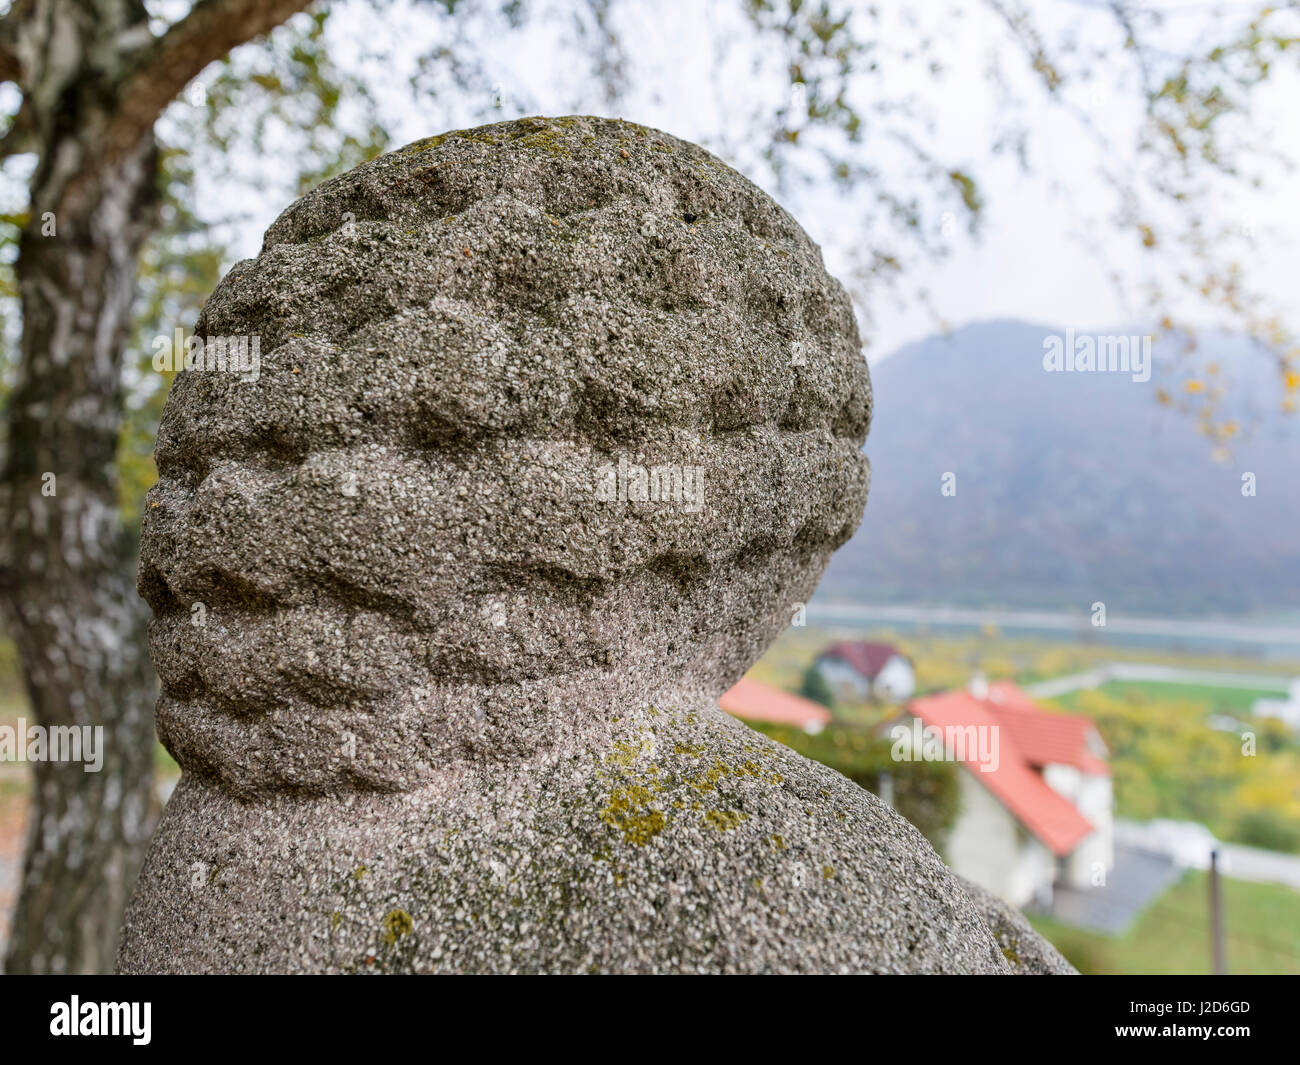 Place of discovery of the Venus von Willendorf (Woman of Willendorf) and a replica commemorating the find. The Wachau is a famous vineyard and listed as Wachau Cultural Landscape as UNESCO World Heritage. Austria (Large format sizes available) Stock Photo